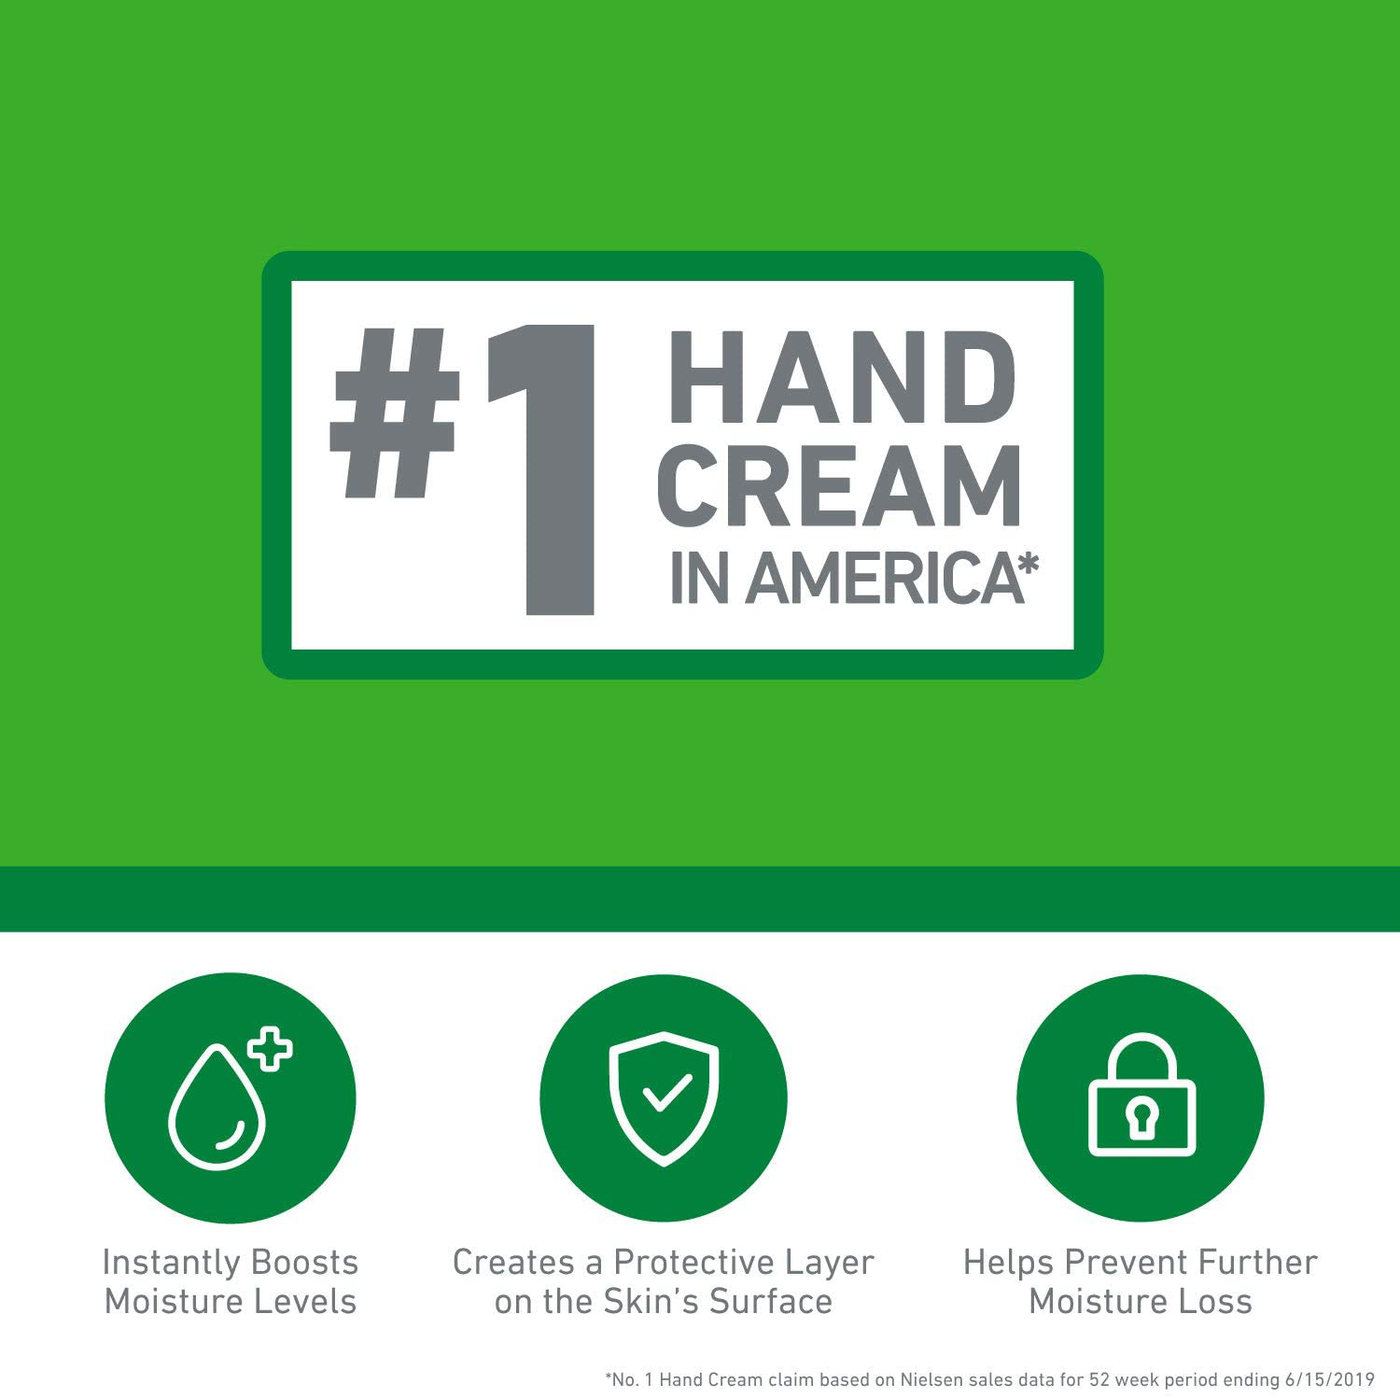 O'Keeffe's Working Hands Hand Cream Value Size, 6.8 ounce Jar, (Pack of 1)